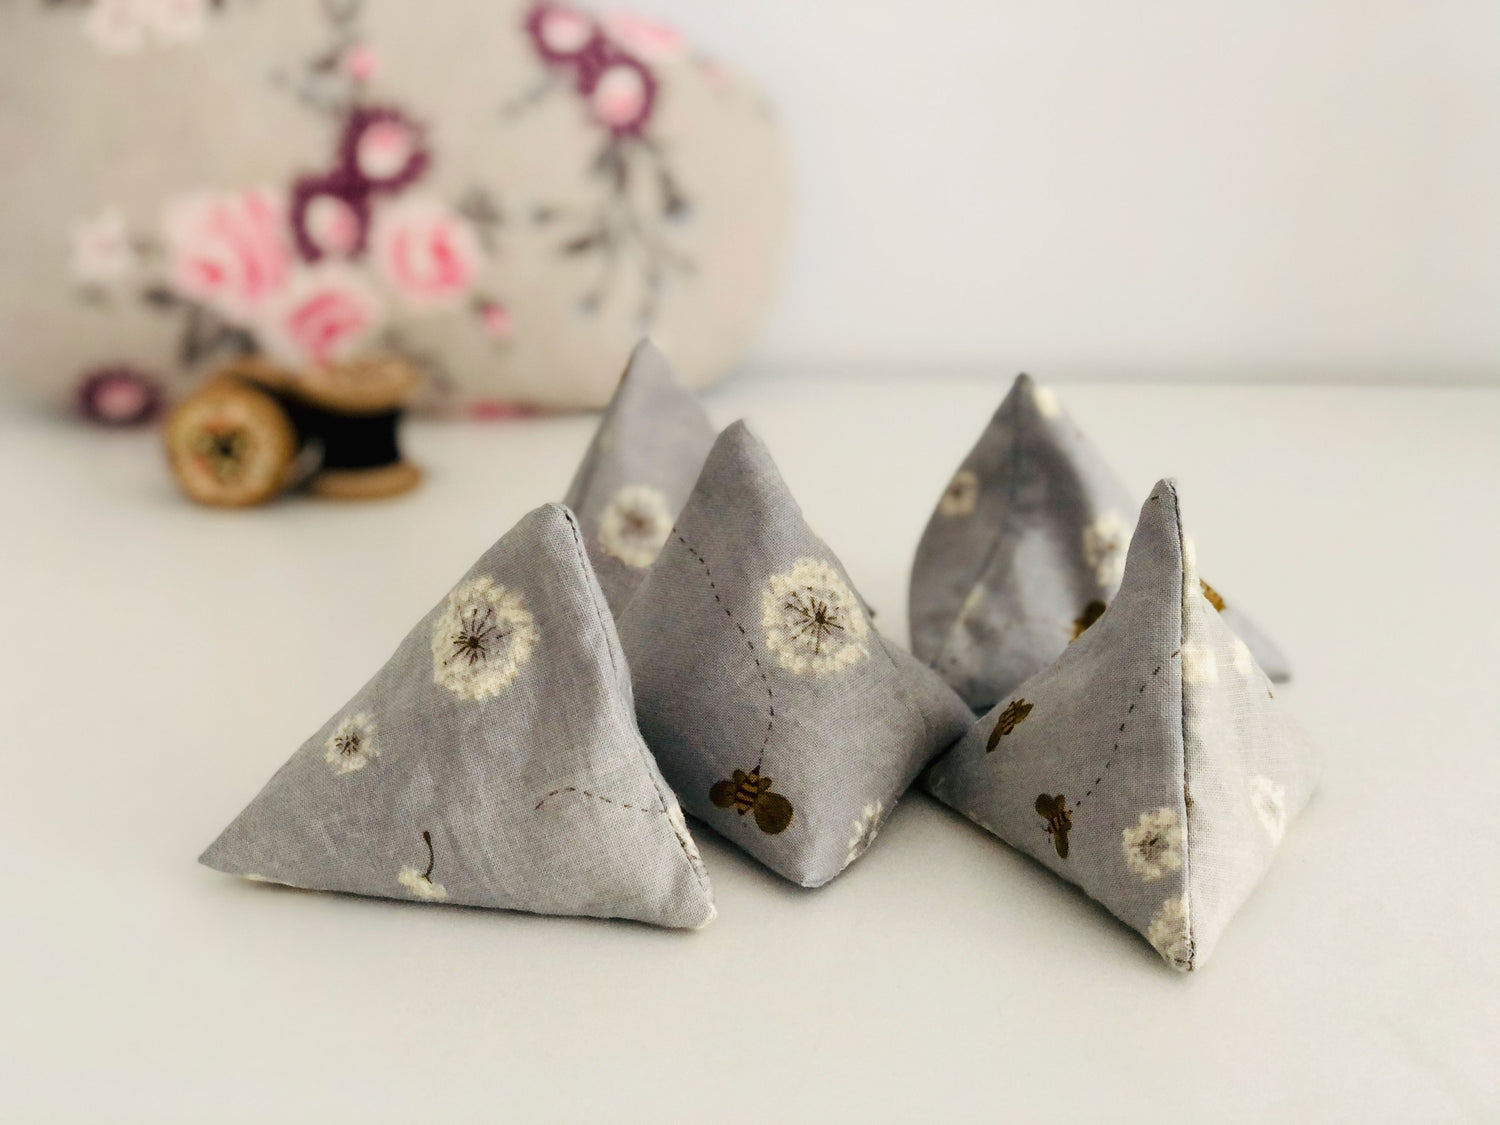 DIY Sewing Pattern Weights From Resin - Creative Fashion Blog